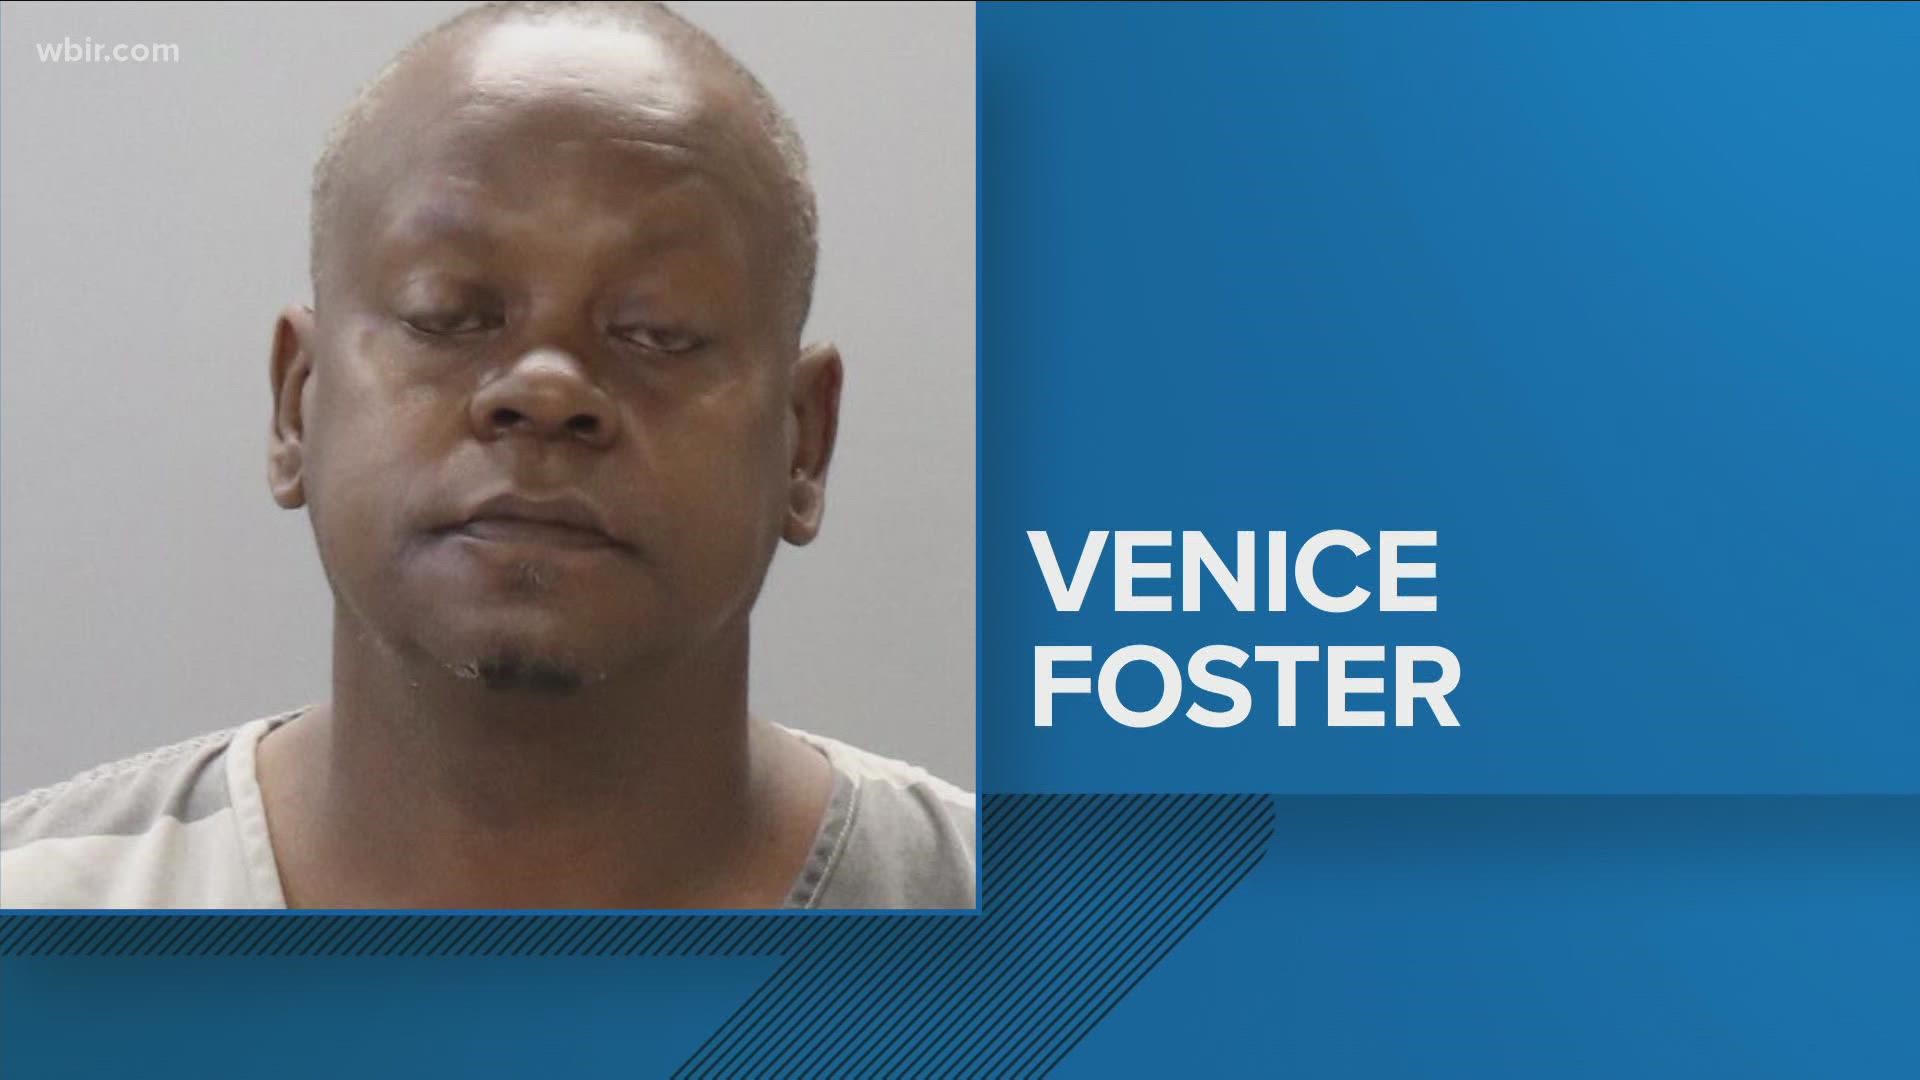 The Knoxville Police Department said Venice Foster was arrested after a traffic stop at Cherry Street and Nichols Avenue.